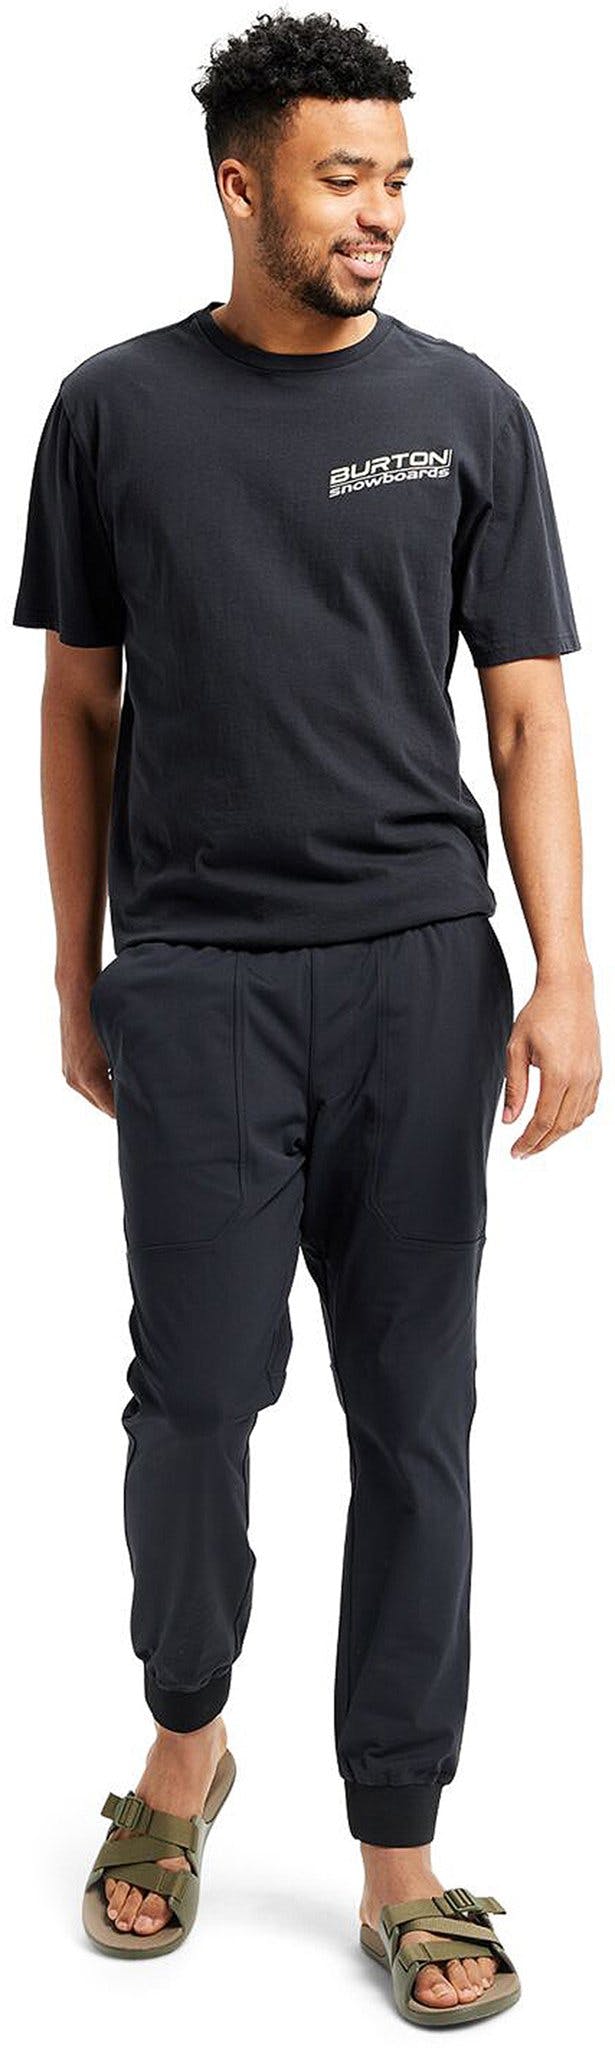 Product image for Multipath Jogger Pants - Men's